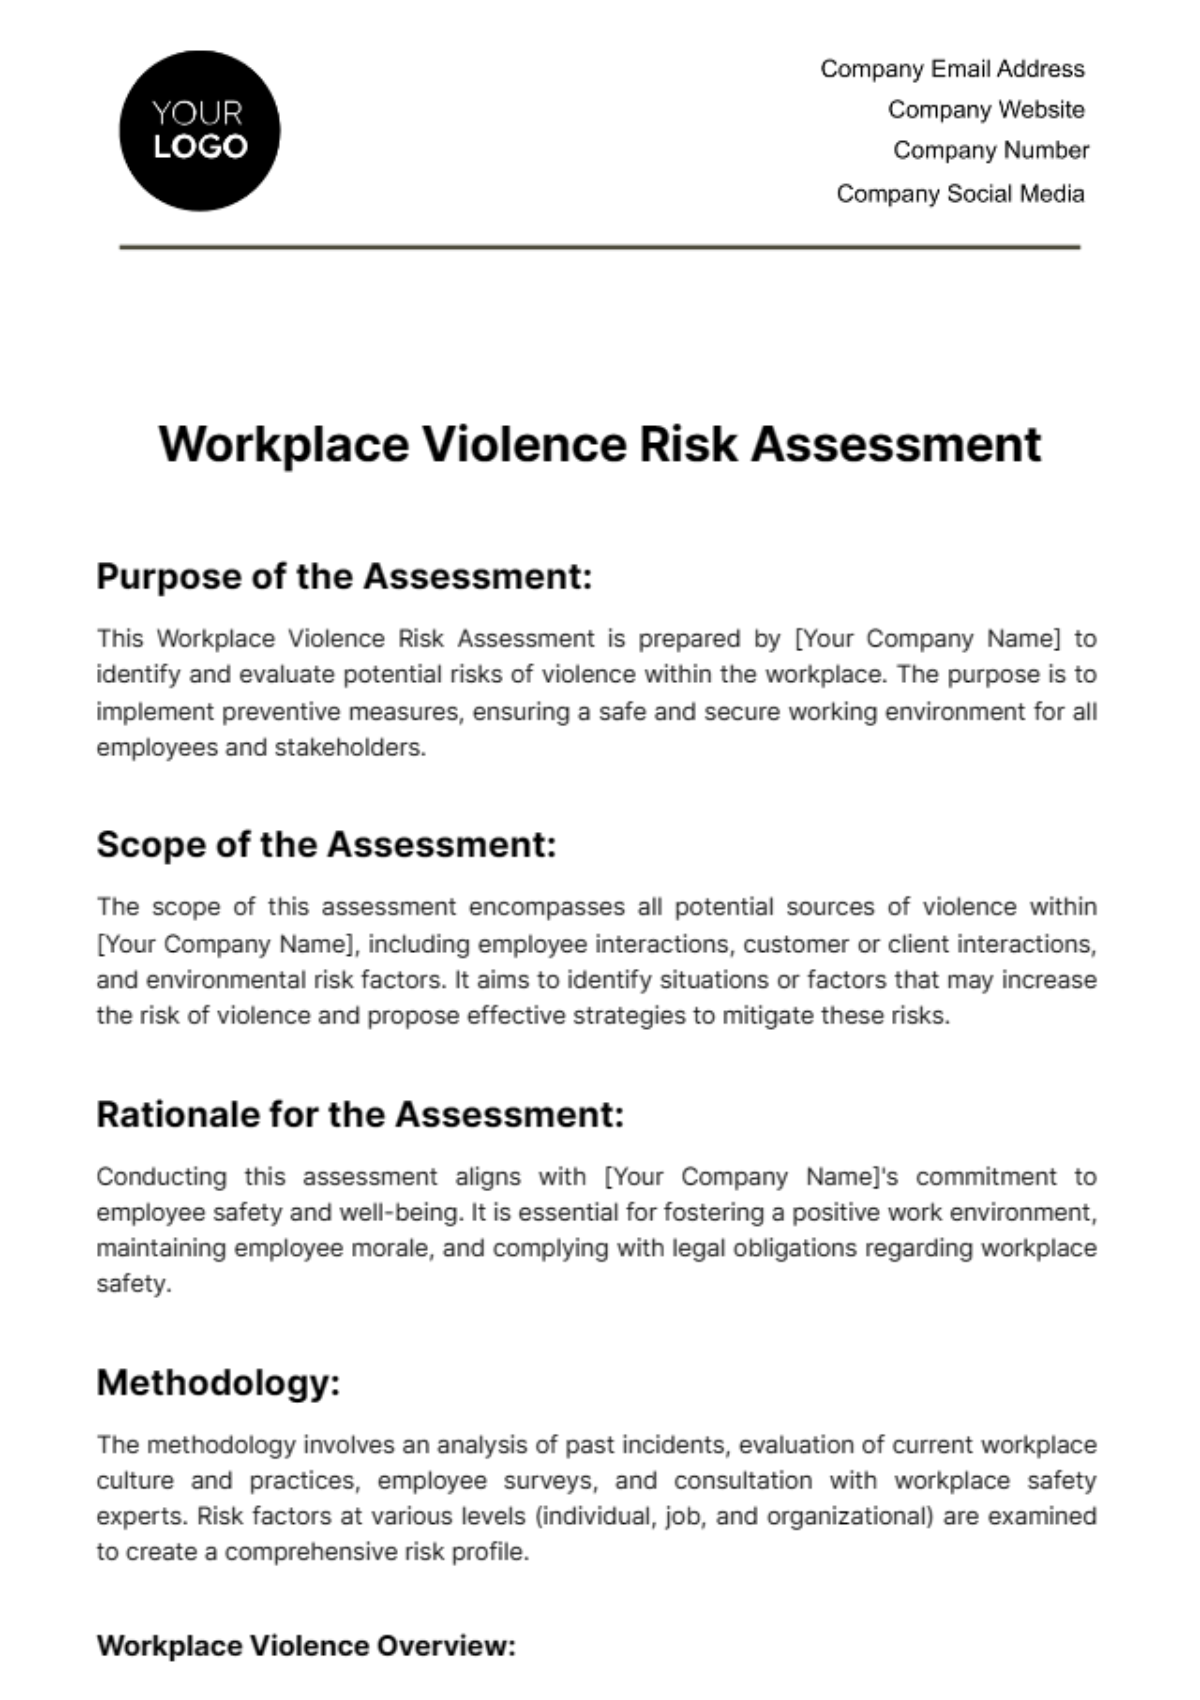 Free Workplace Violence Risk Assessment Template